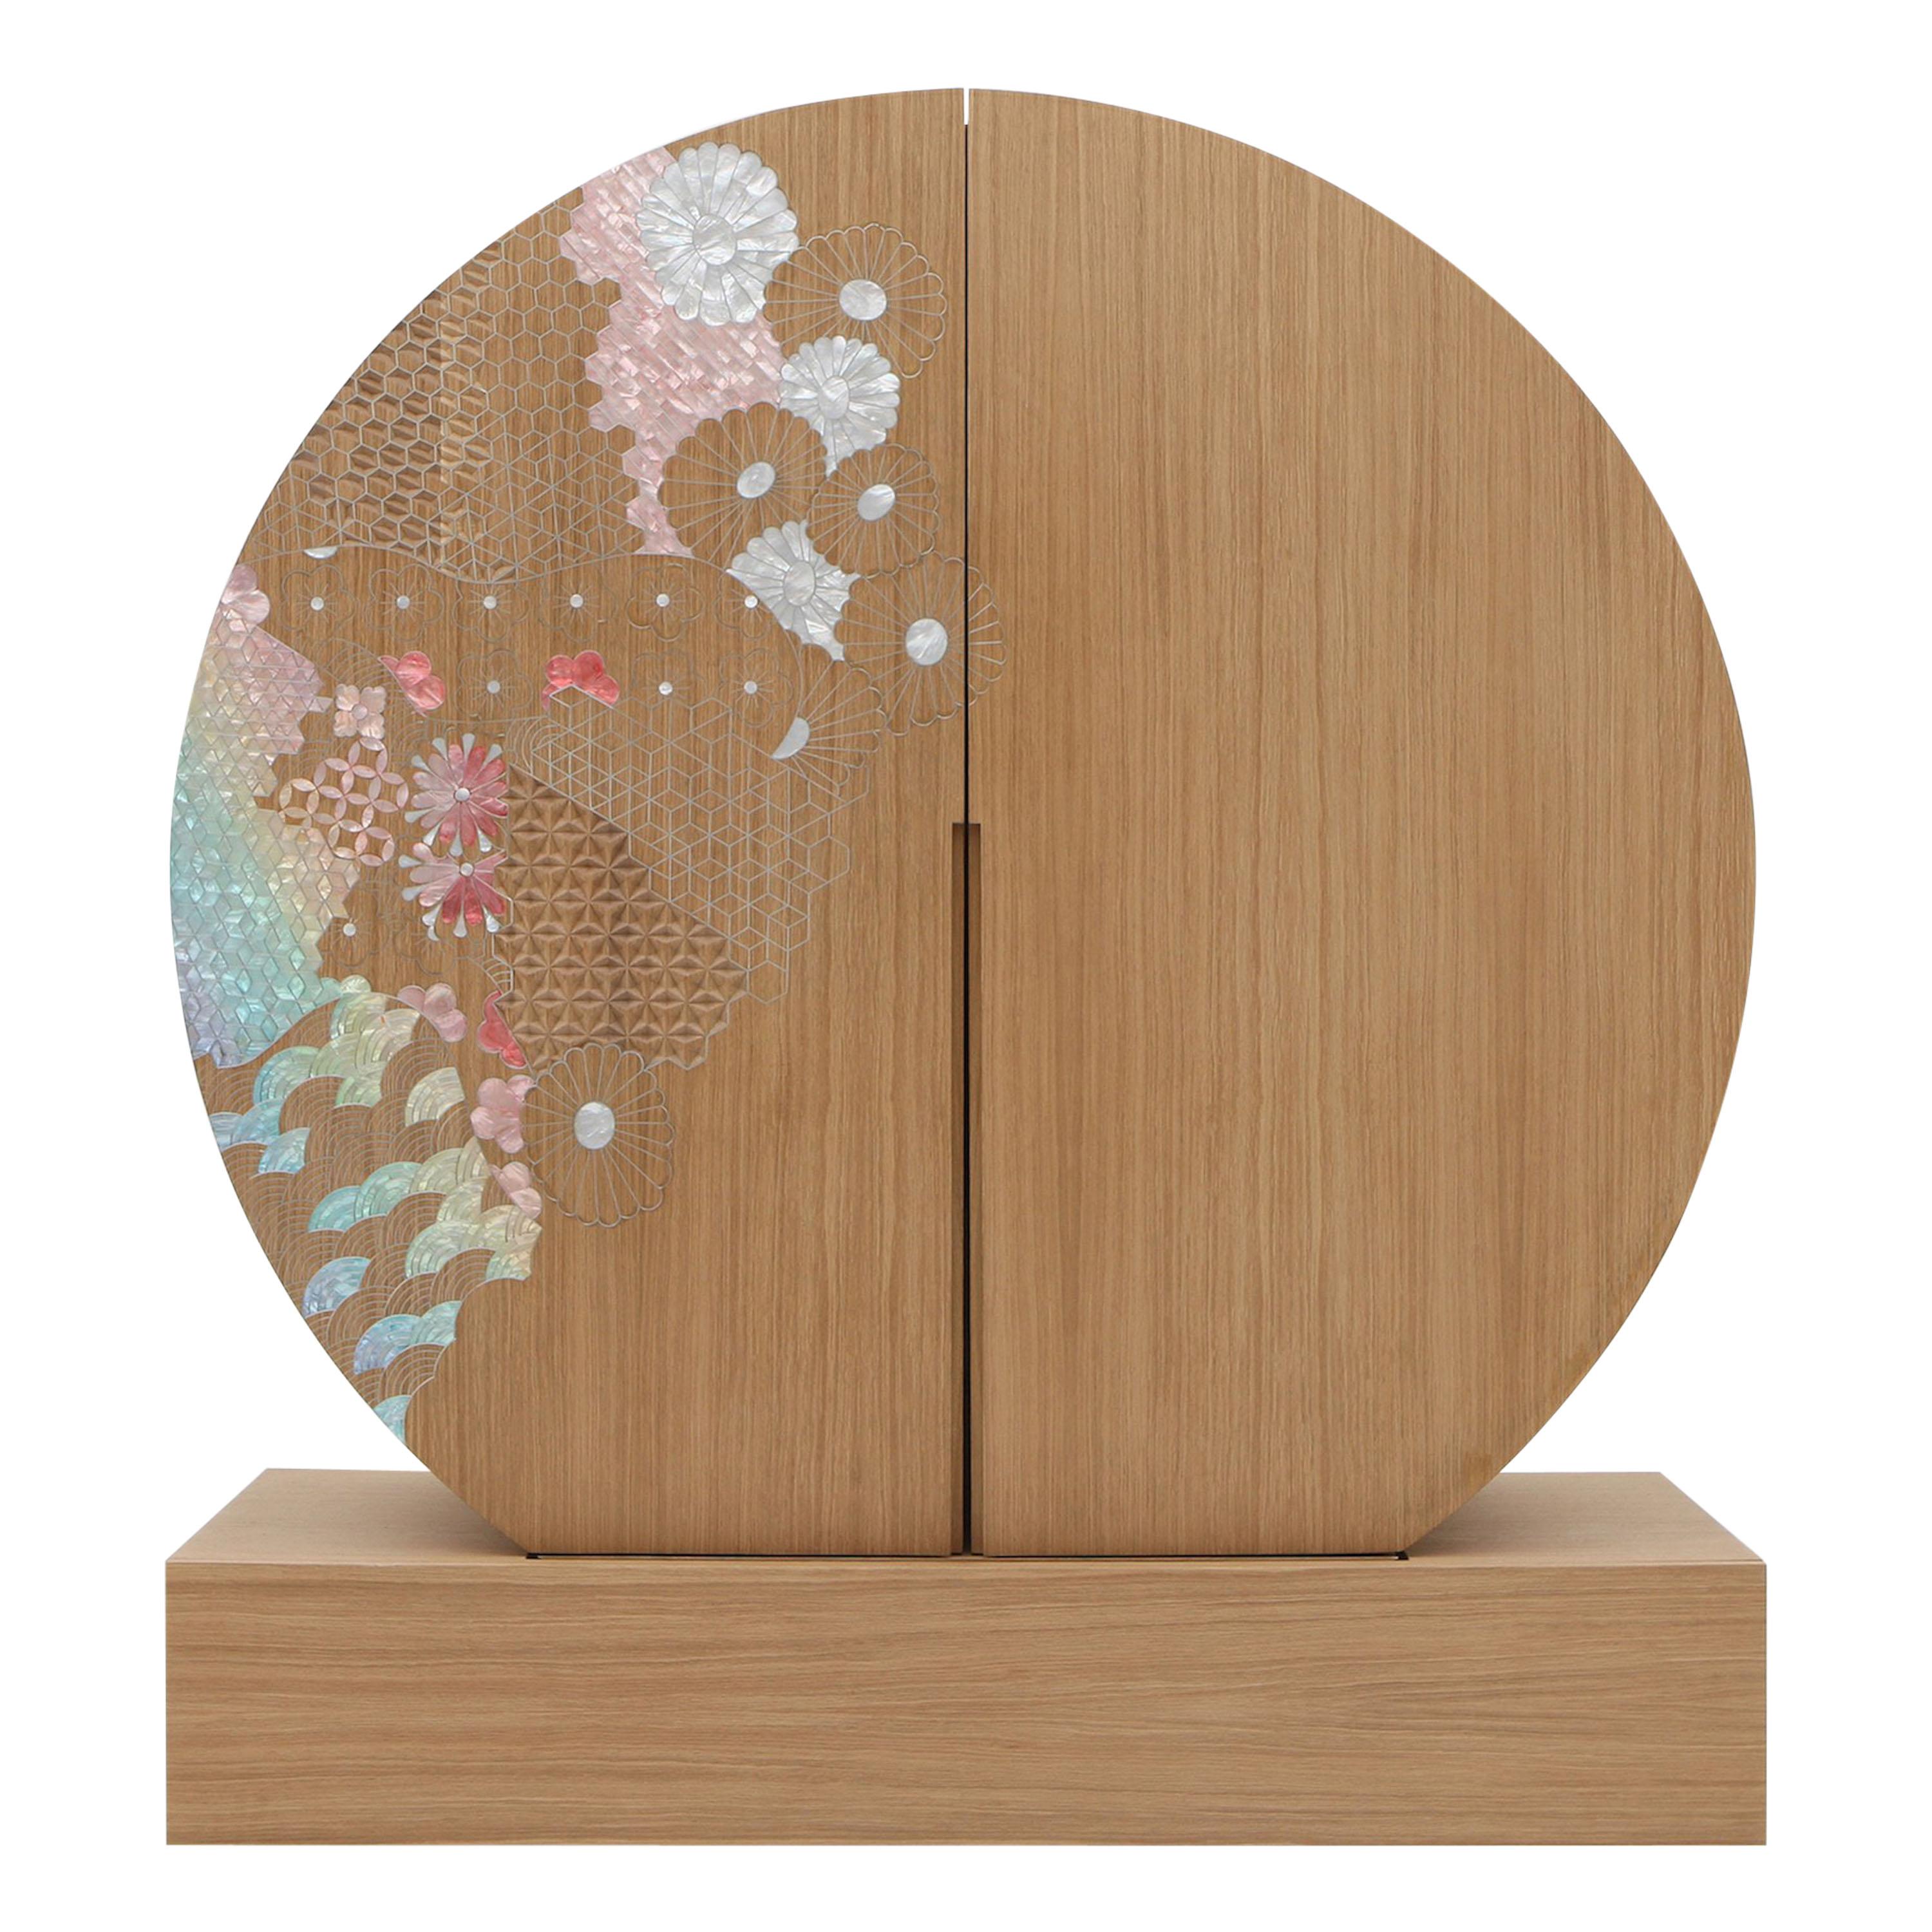 Land of the Rising Sun - Cabinet inspiration by contemporary Japanese aesthetics For Sale